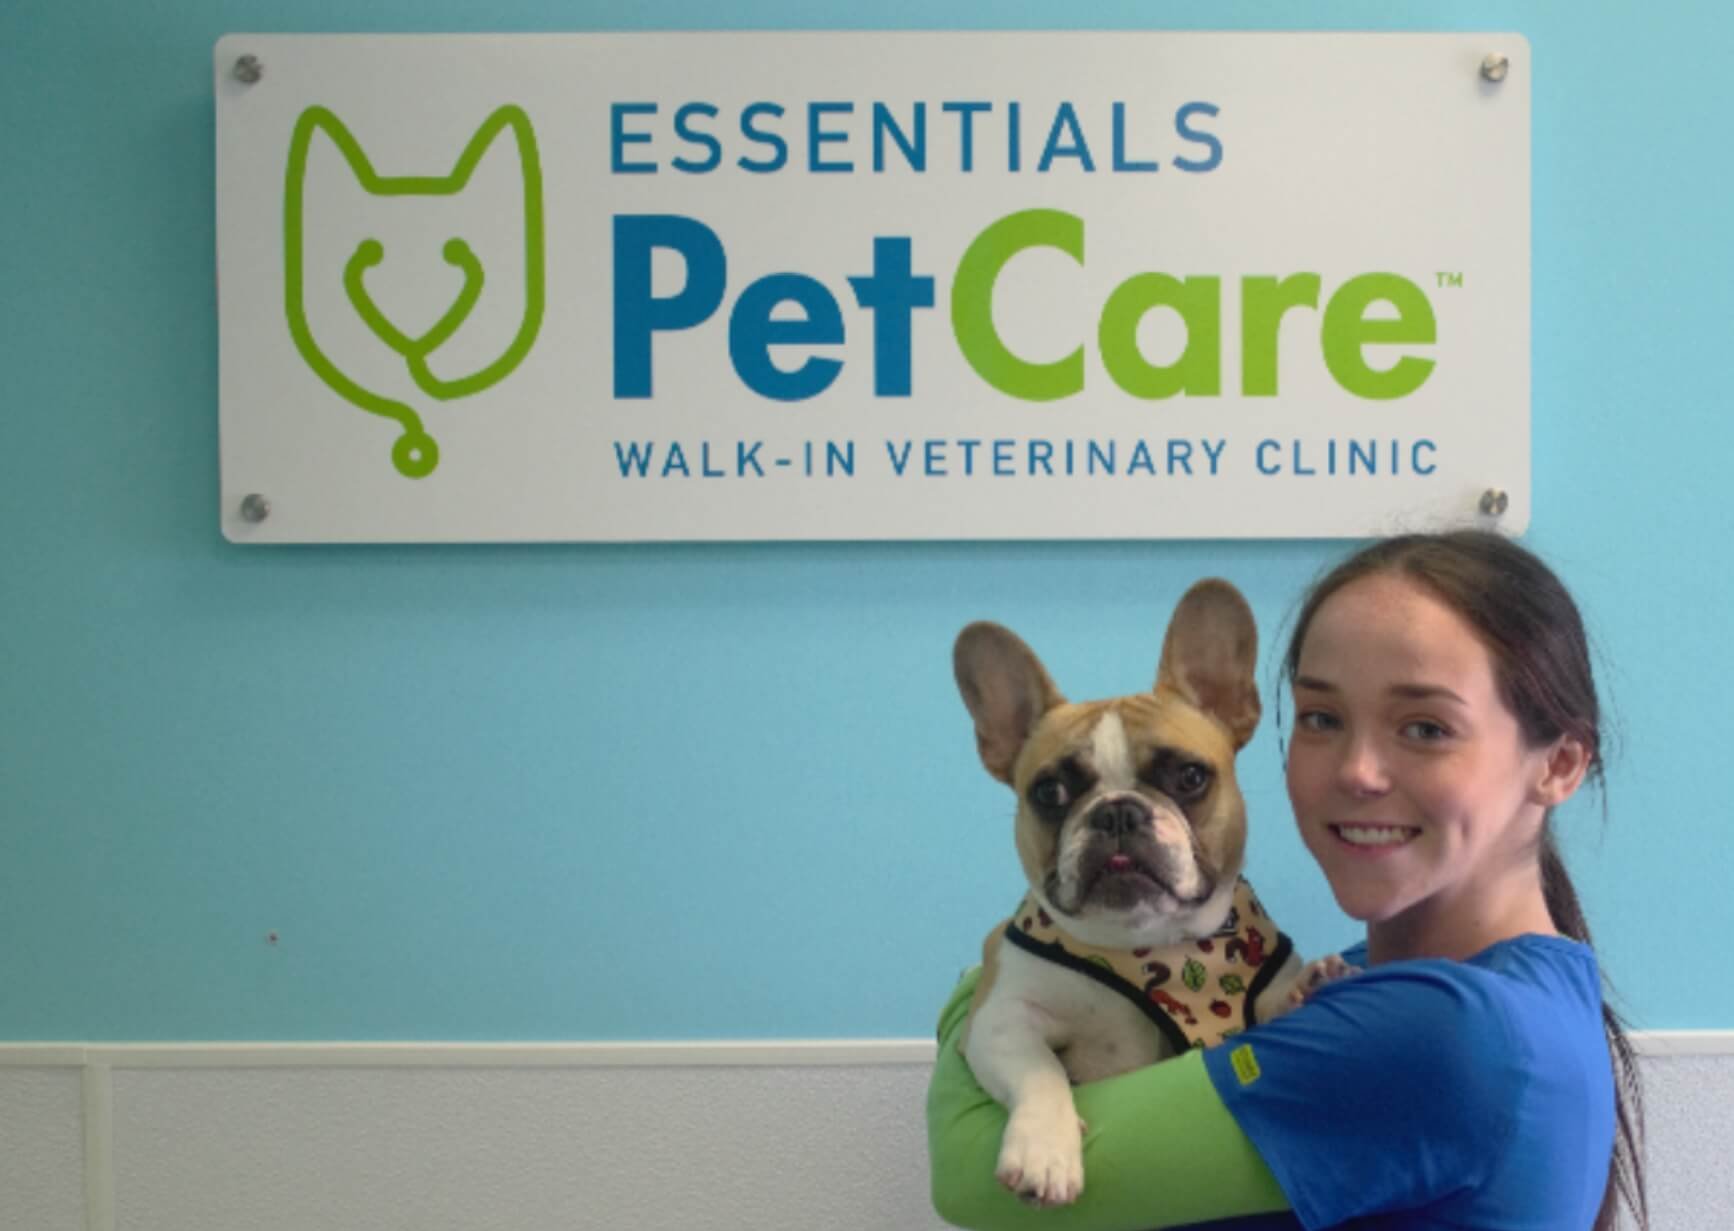 Walmart Vet Clinic: Why We're Proud to Be Located in Walmarts